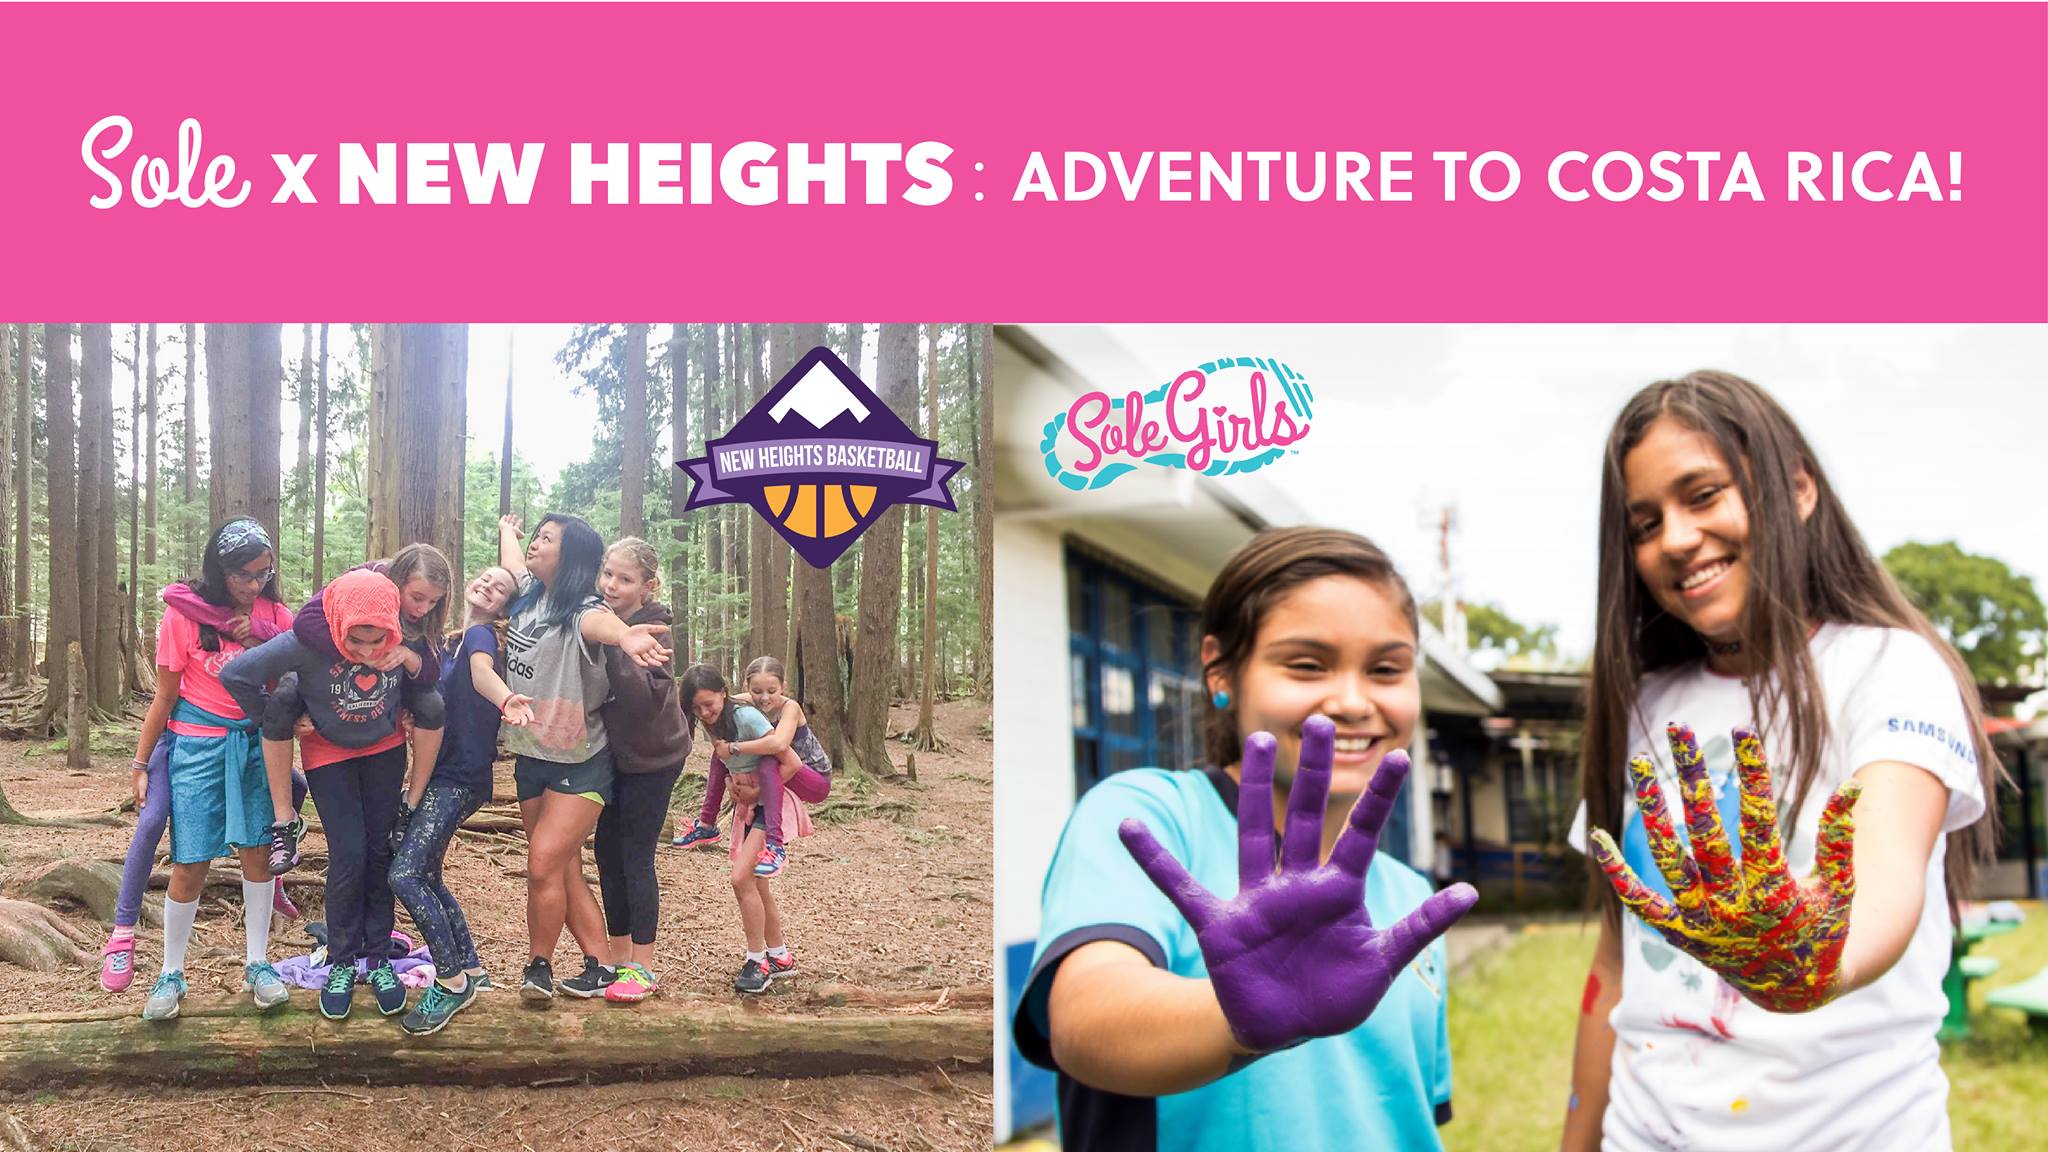 New Heights x Sole Adventure to Costa Rica